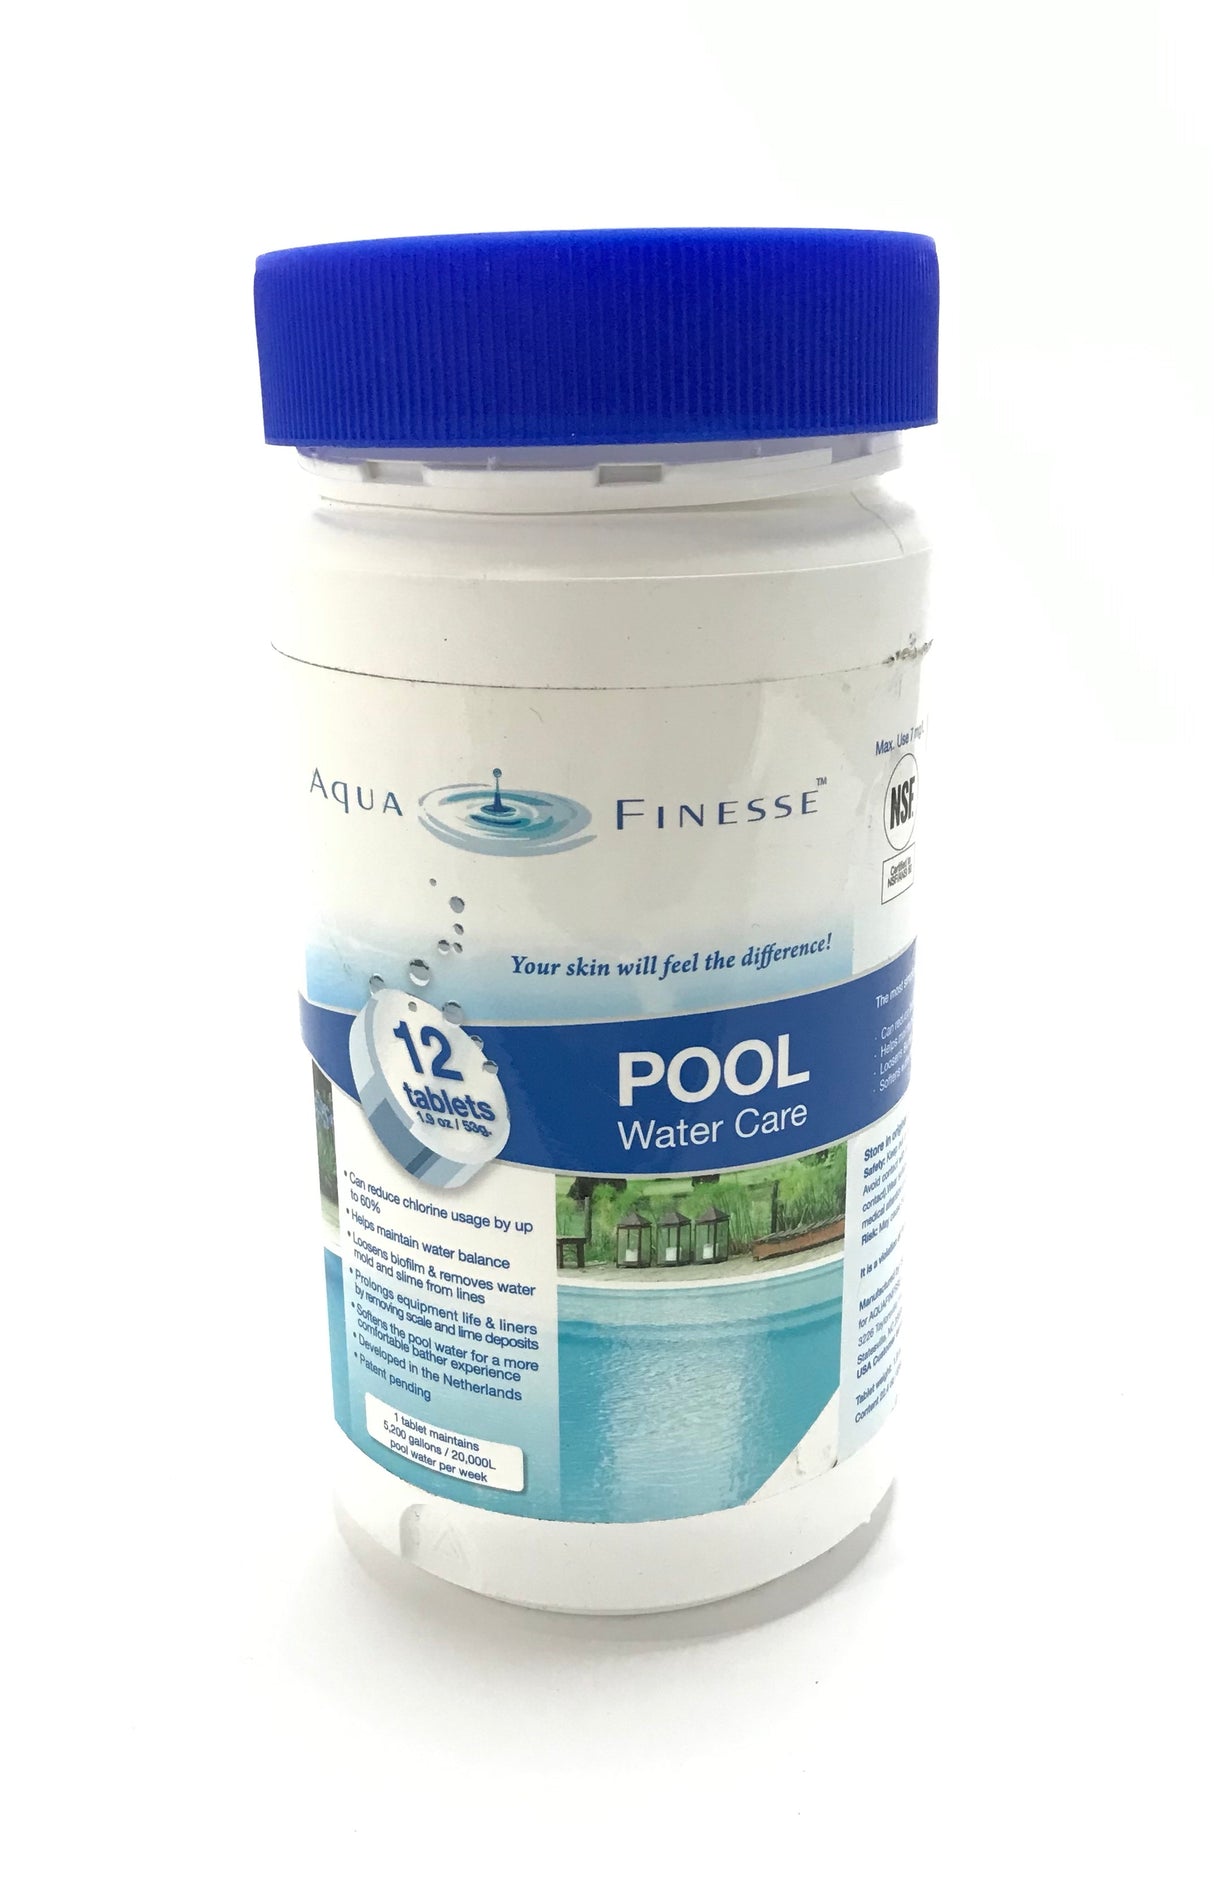 AquaFinesse Pool Water Care Tablets - Loosens Biofilm - Reduce Chlorine Usage - 12 count